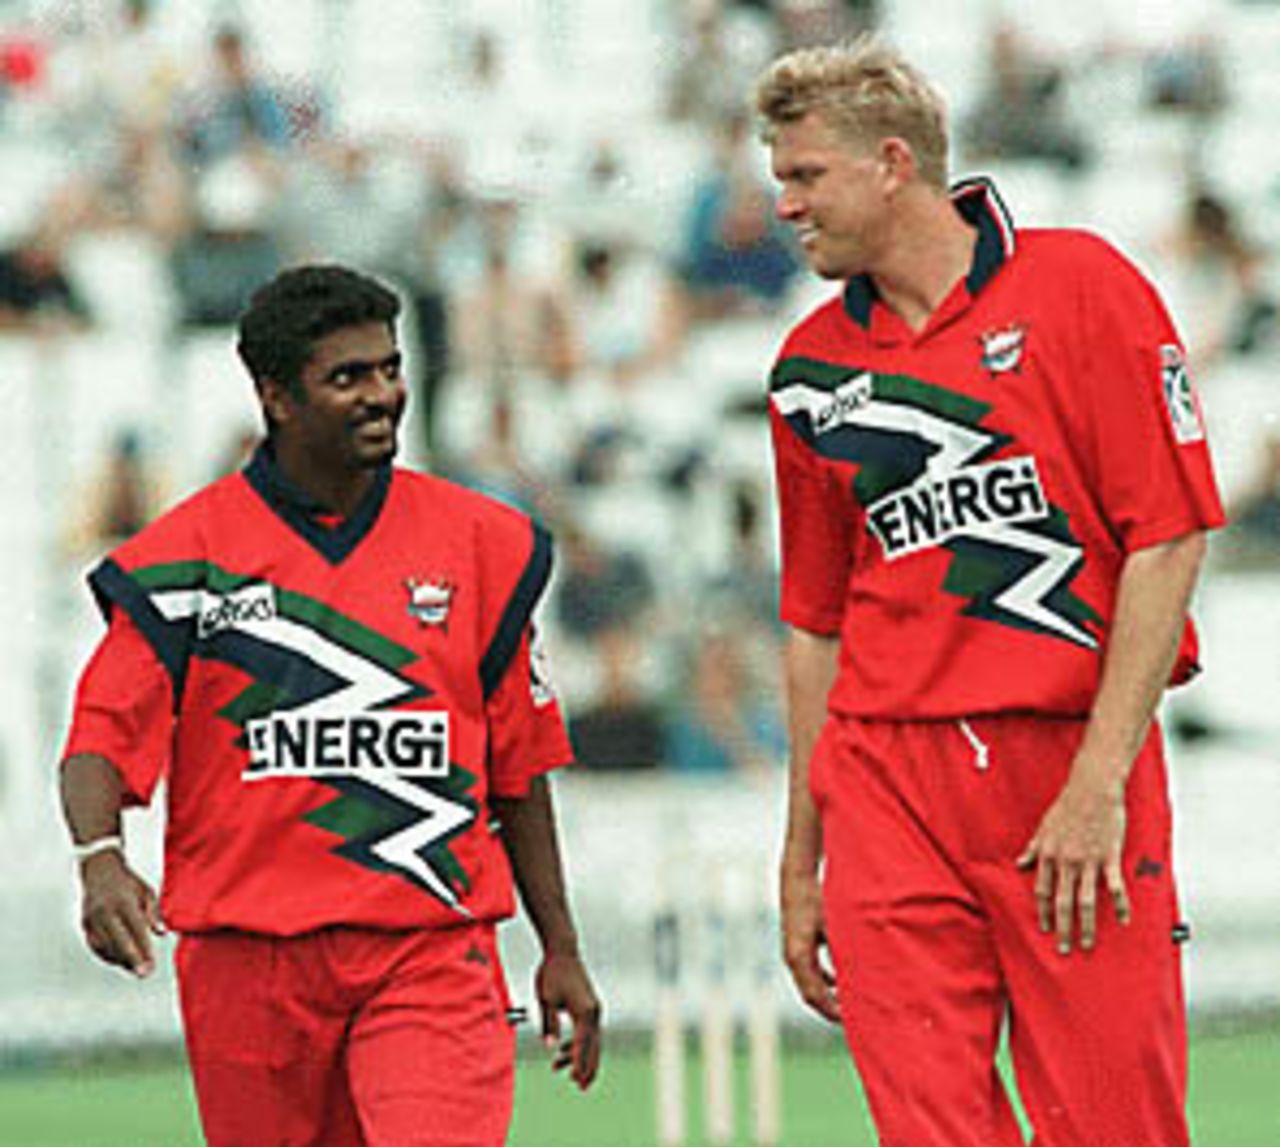 Muralitharan and Peter Martin in the field, Warwickshire v Lancashire, National League 1st Division, 13 June 1999